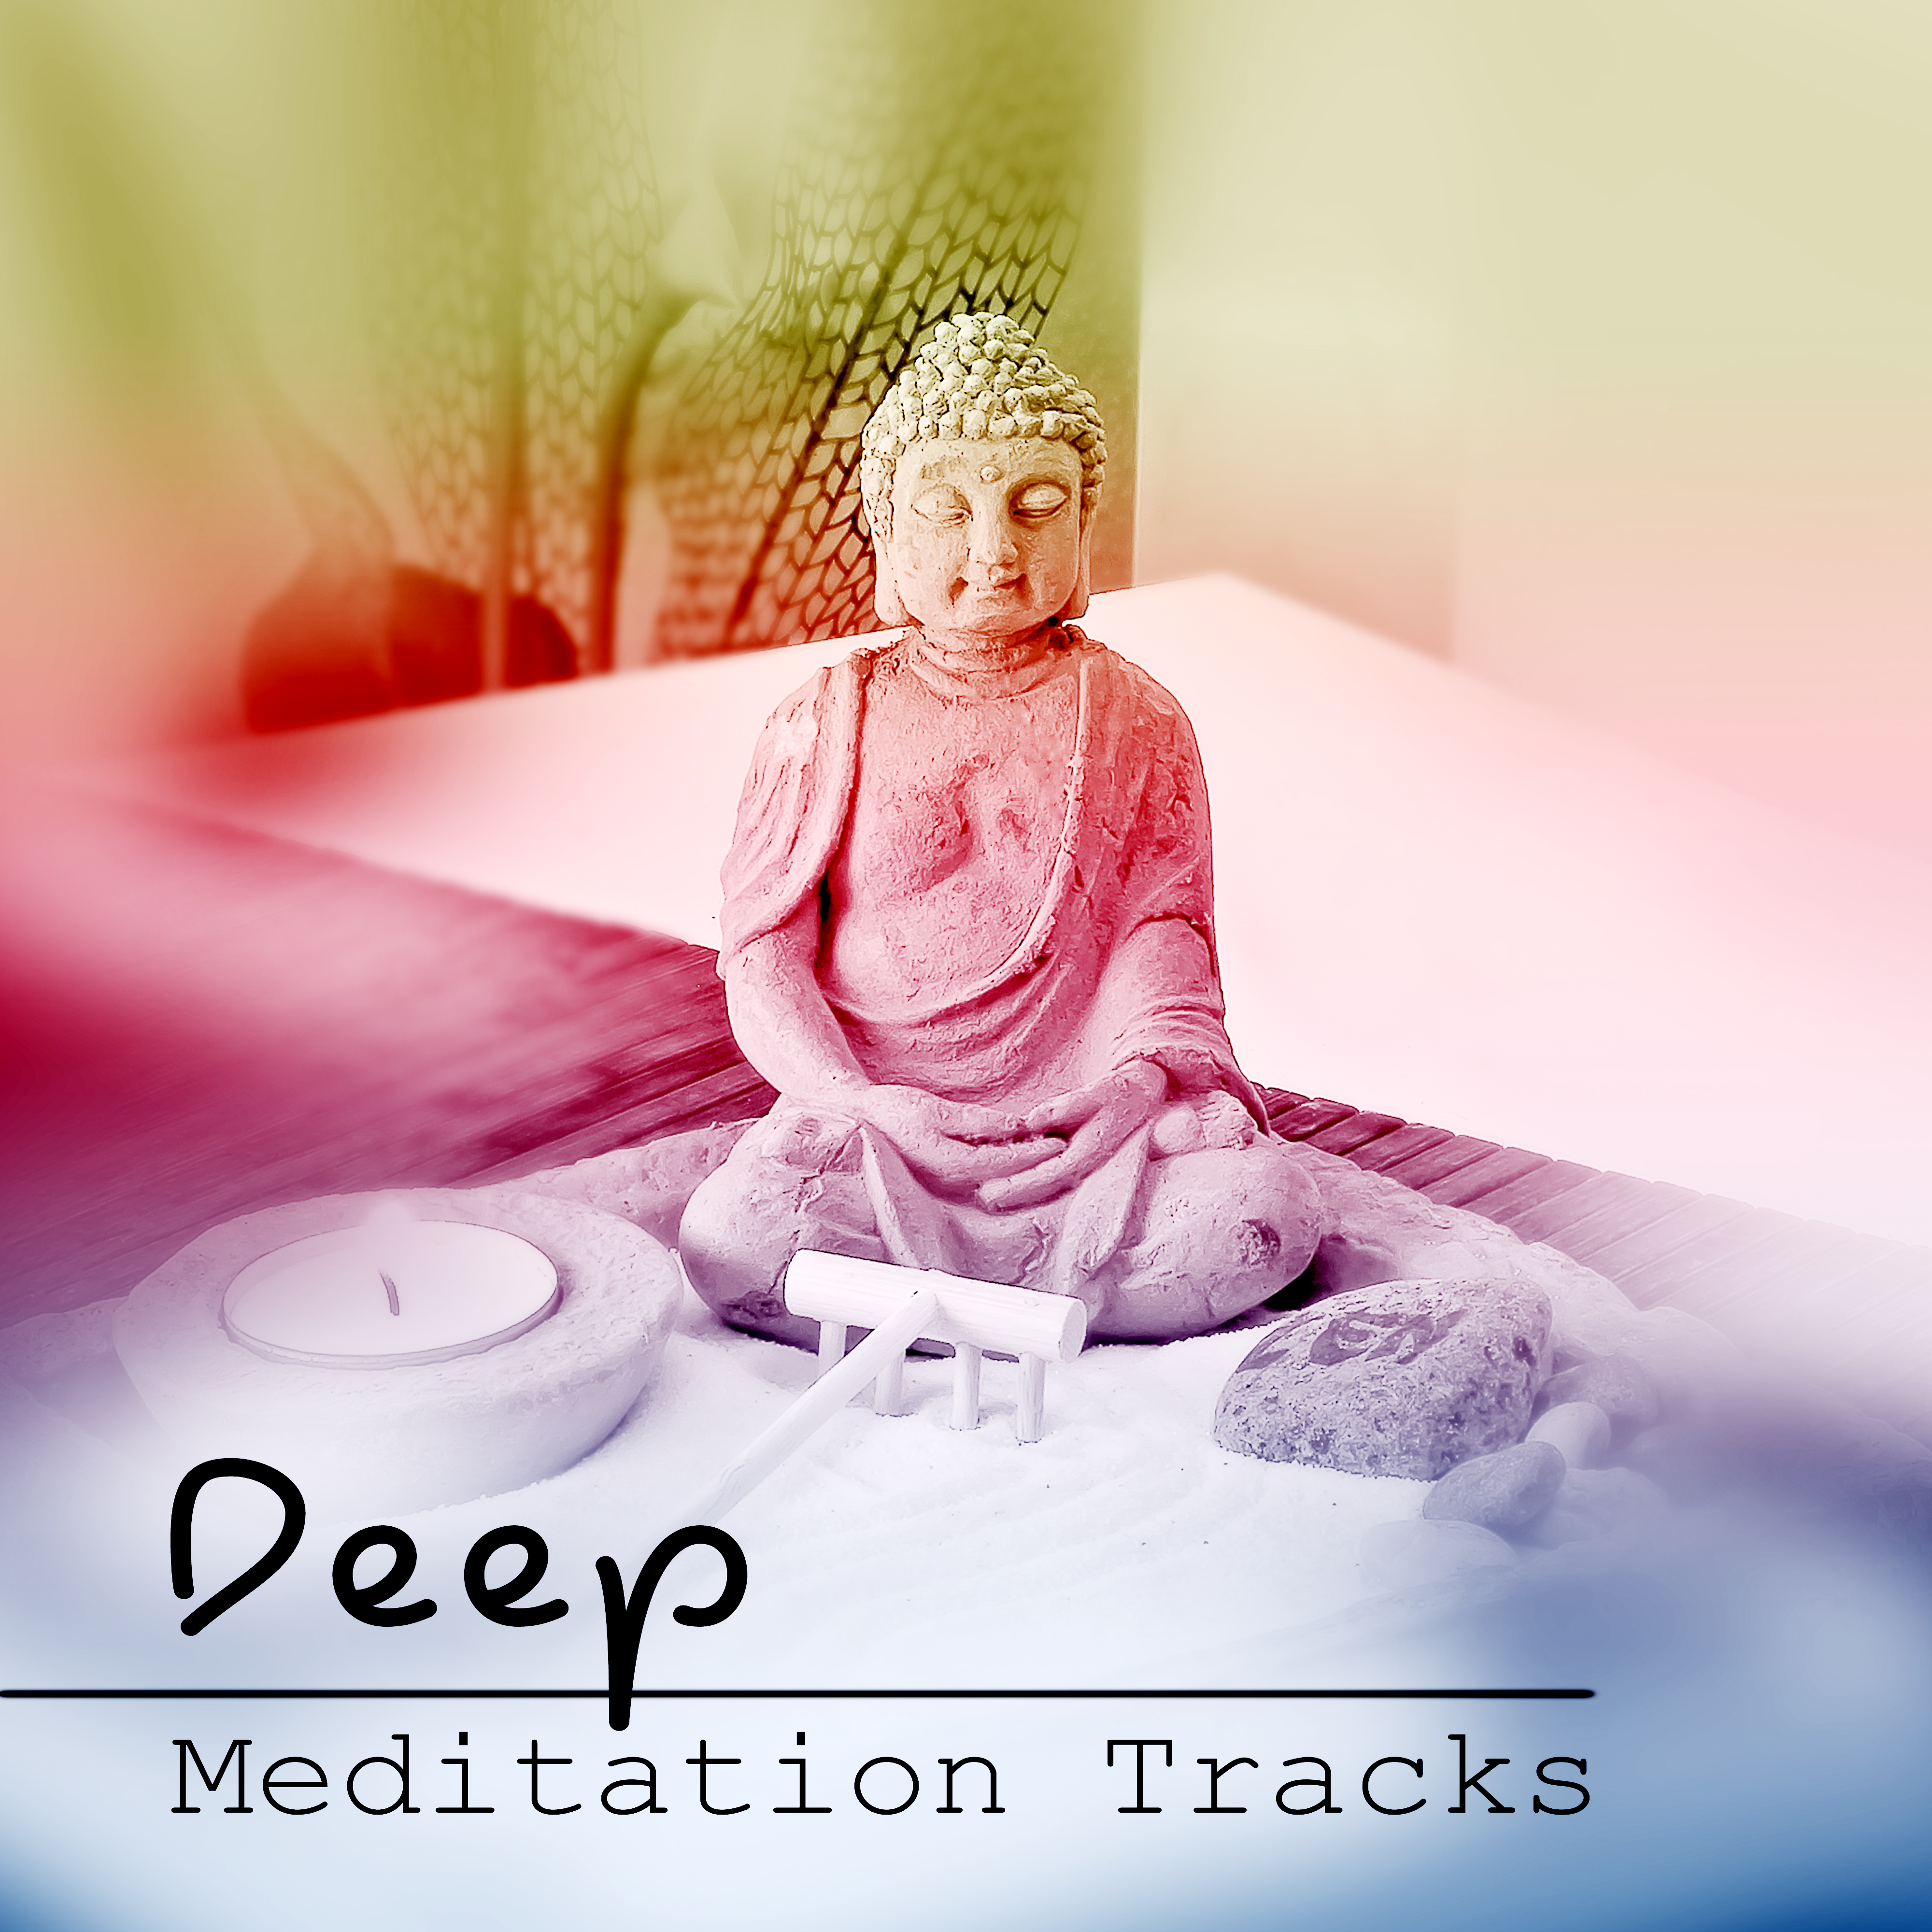 Deep Meditation Tracks - Sounds of Nature & Relaxing Meditation Music for Spa, Yoga, Sleep, Study and Healing, Guided Imagery and Mindfulness Exercises